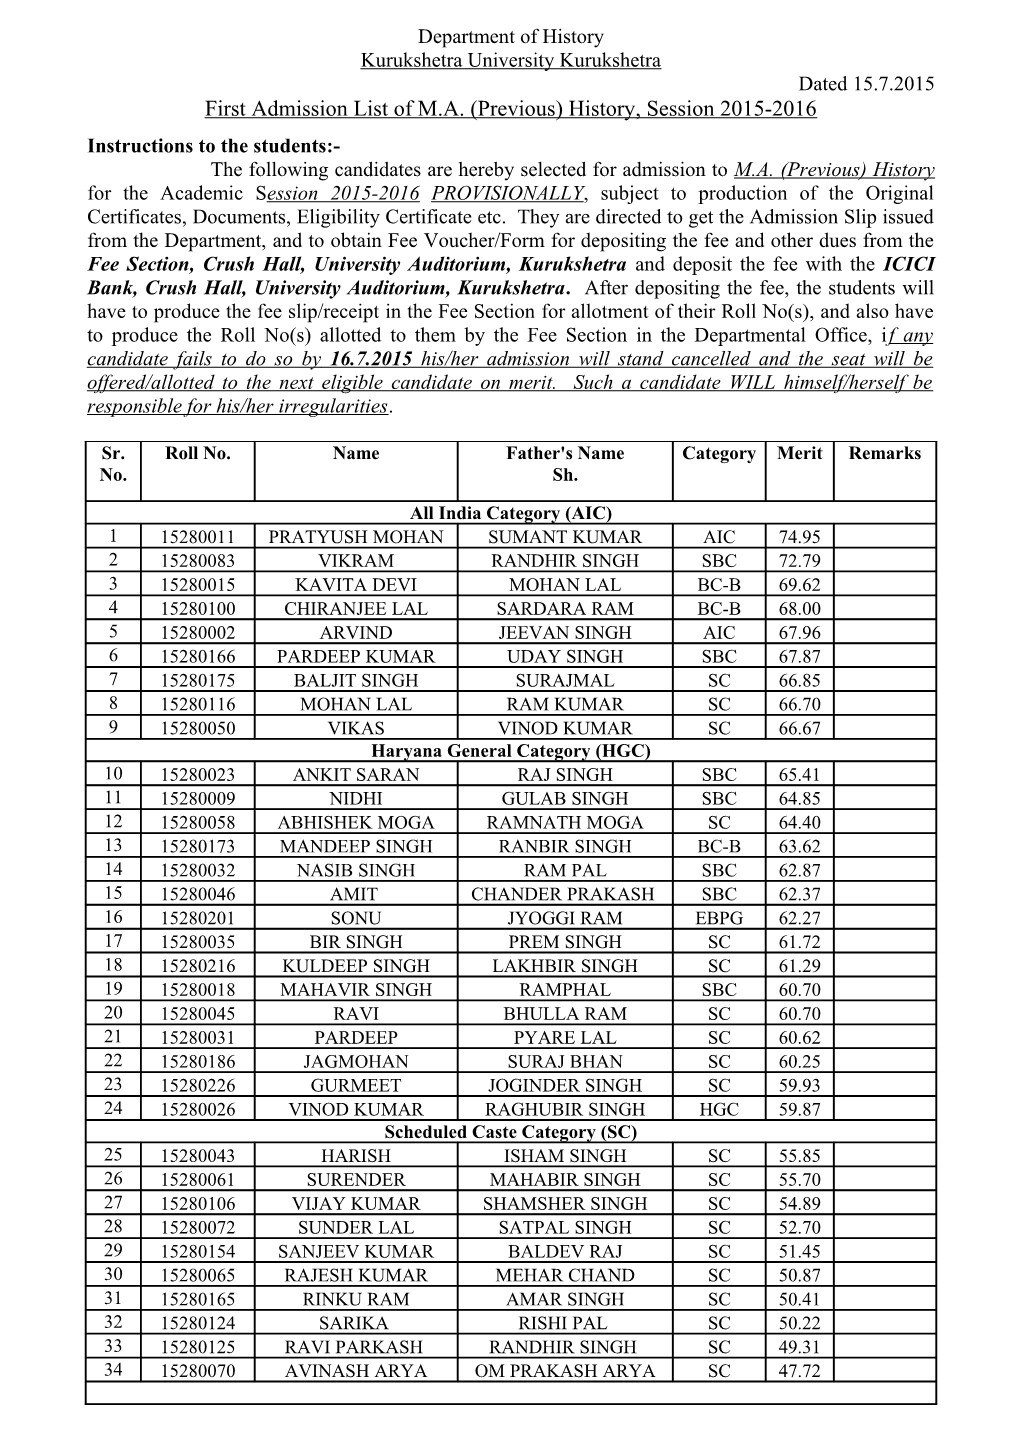 First Admission List of M.A. (Previous) History, Session 2015-2016